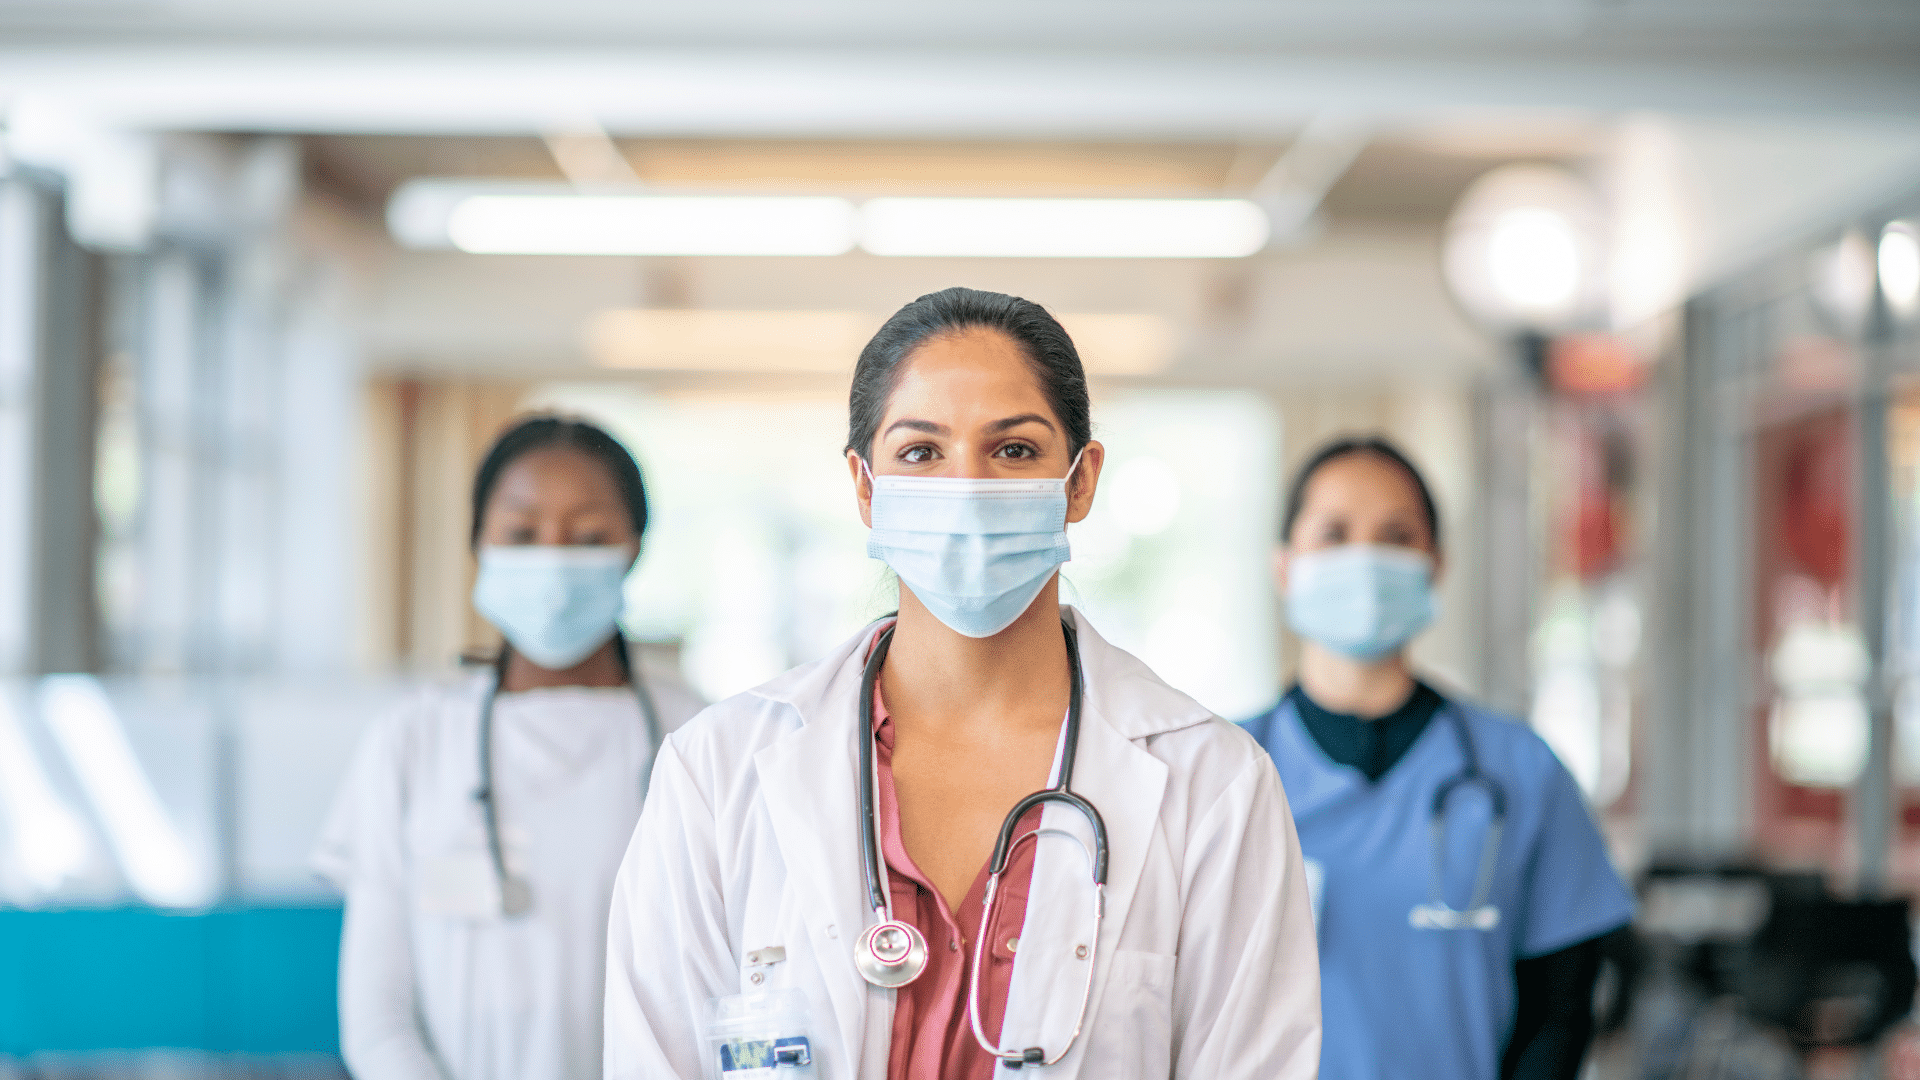 A group of nurses wearing surgical masks in a hospital hallway.